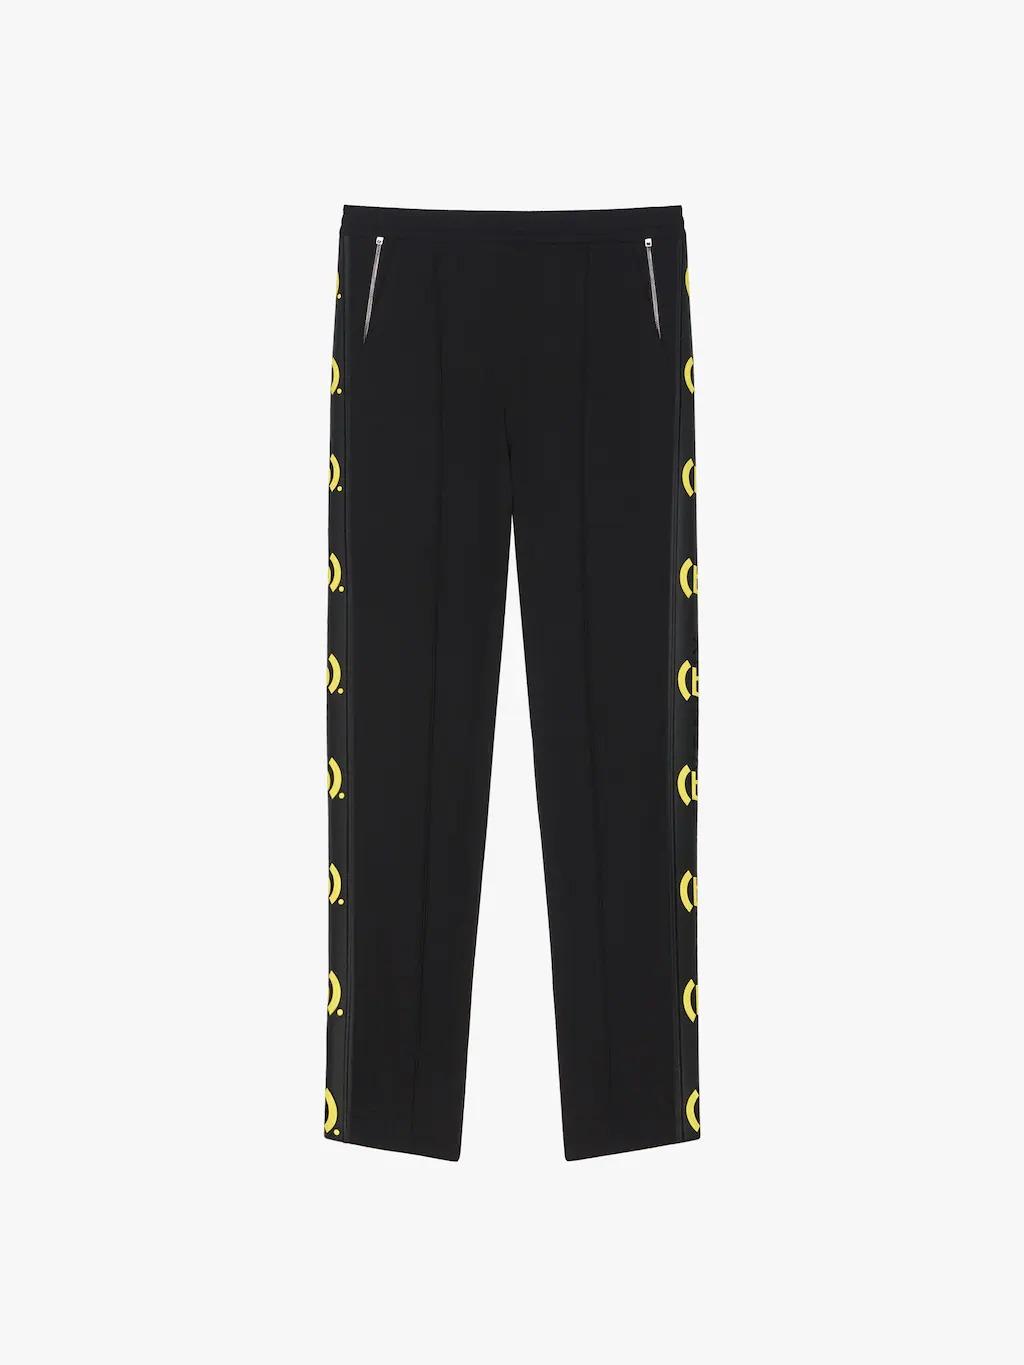 slim-fit-jogger-pants-in-jersey-with-b-printed-givenchy-bands-6622_16845014141-1000